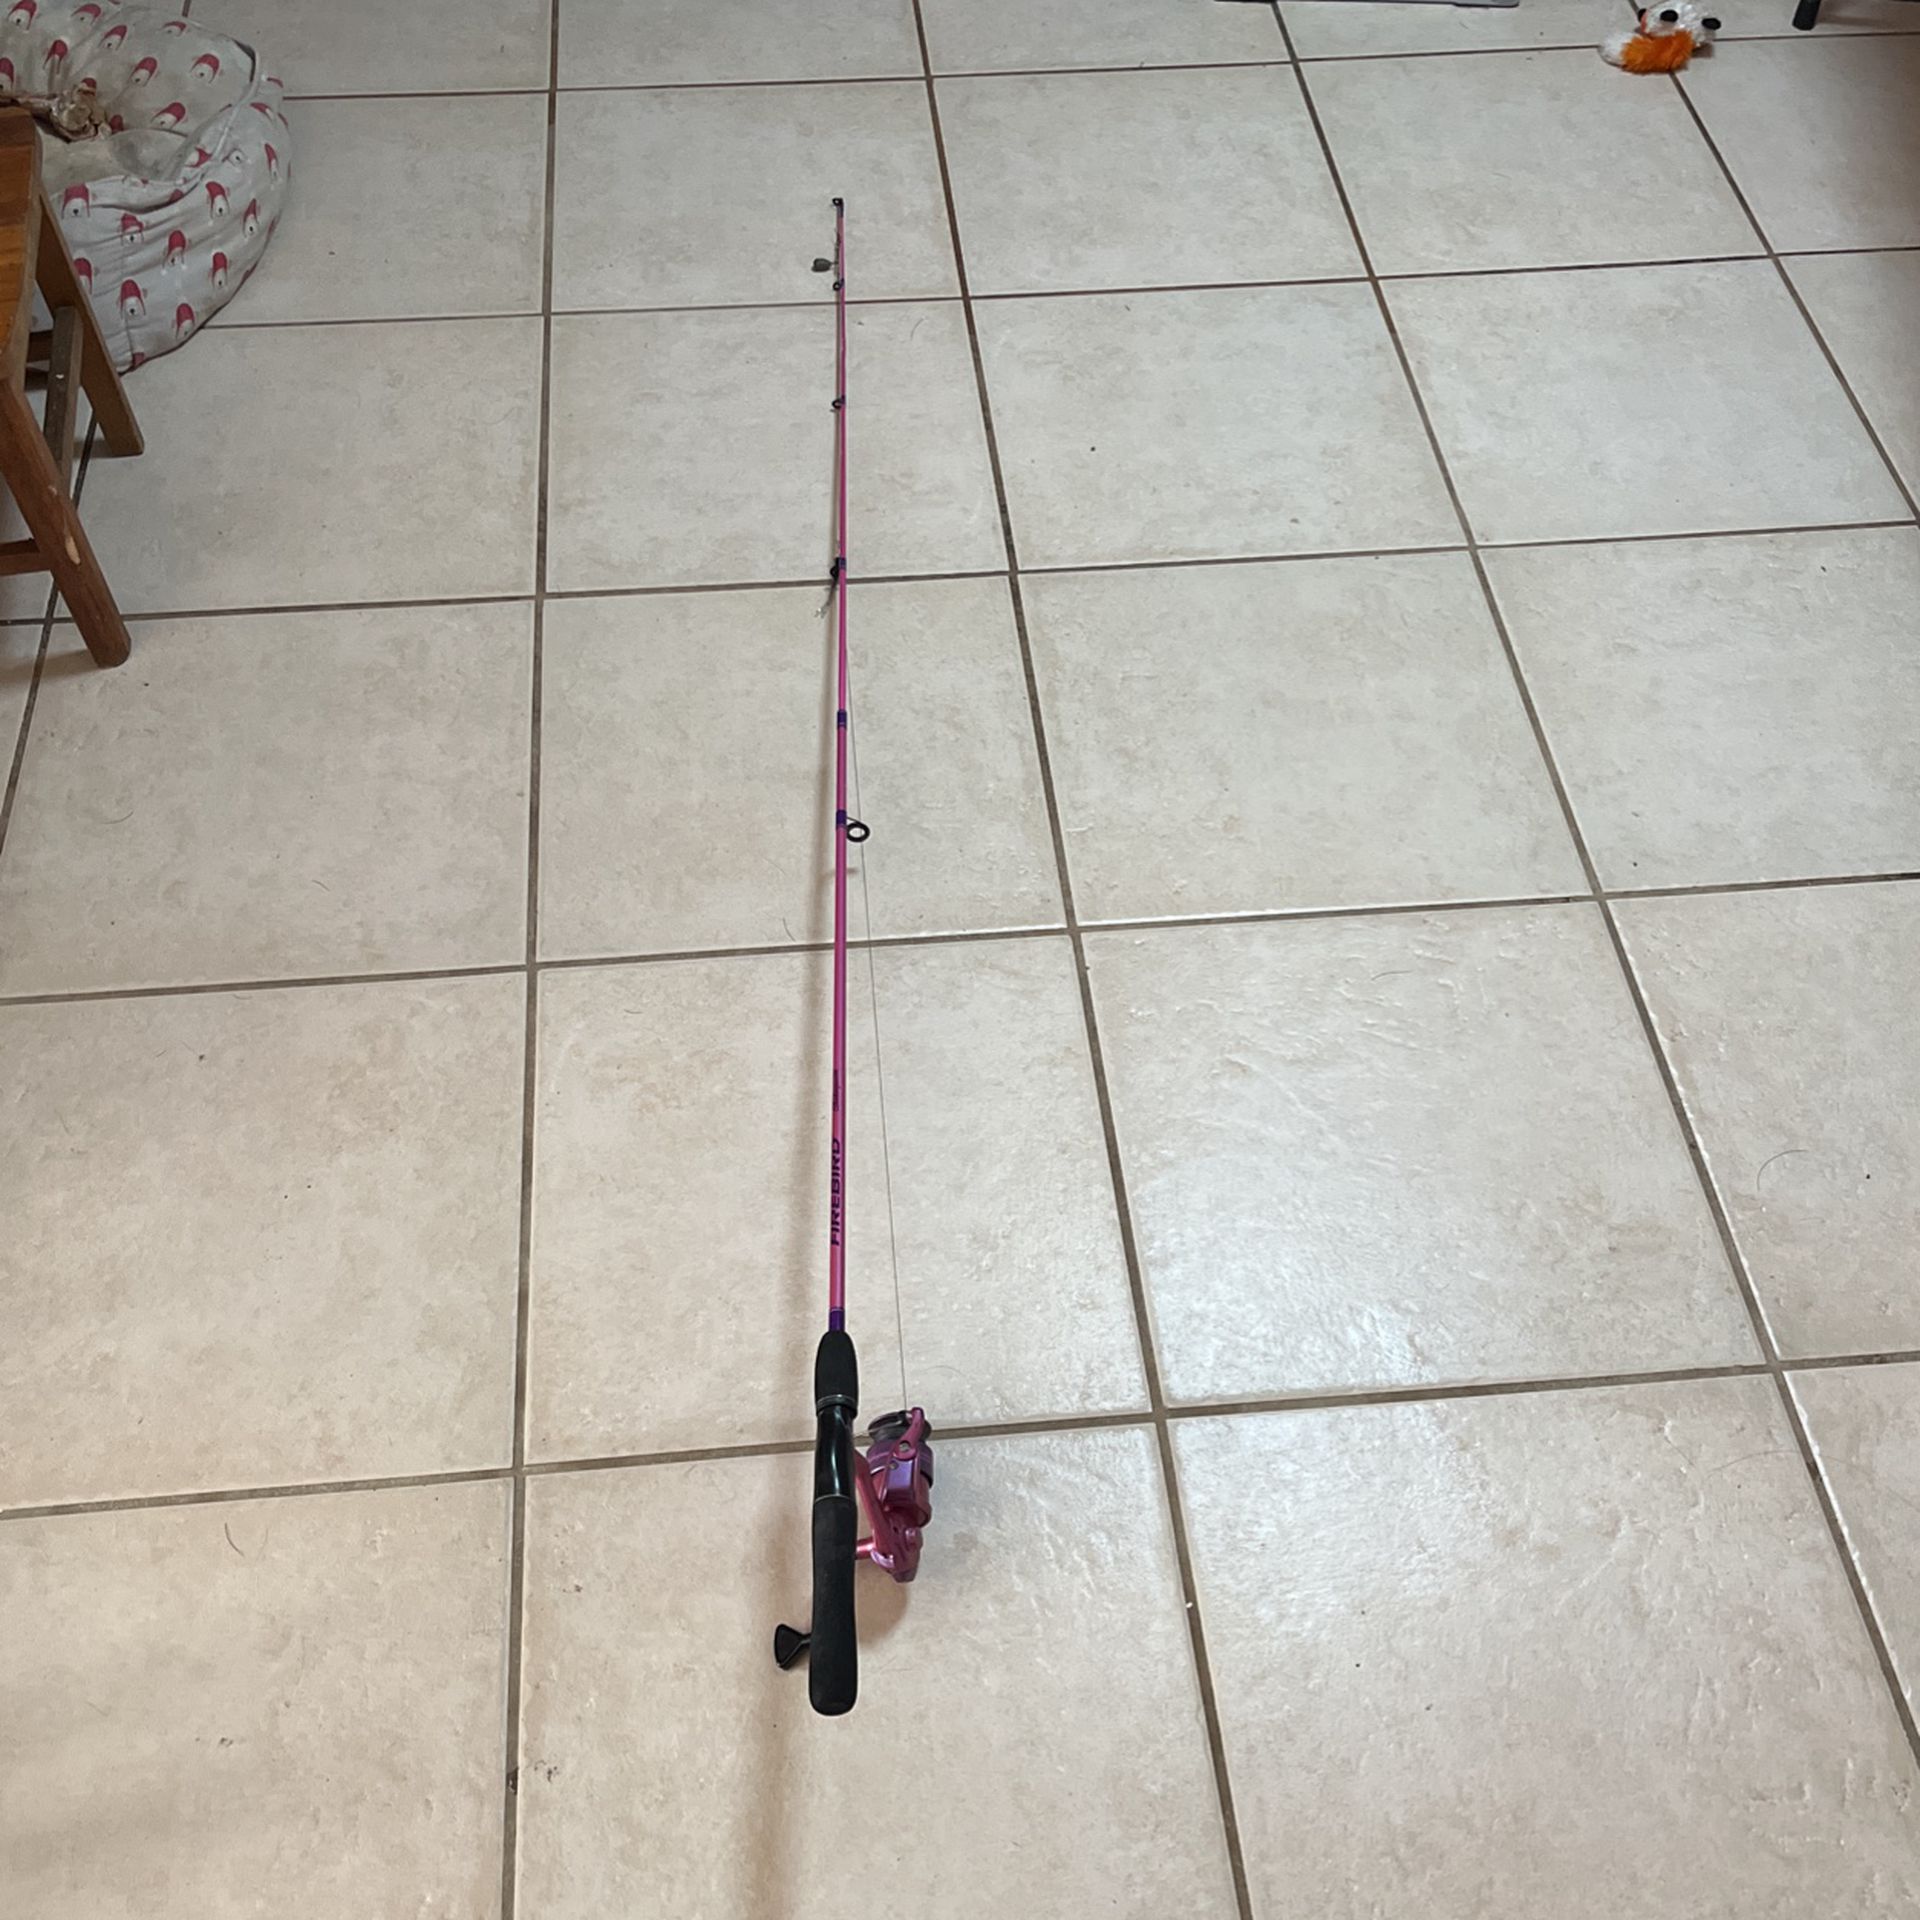 Fishing Rod With Reel